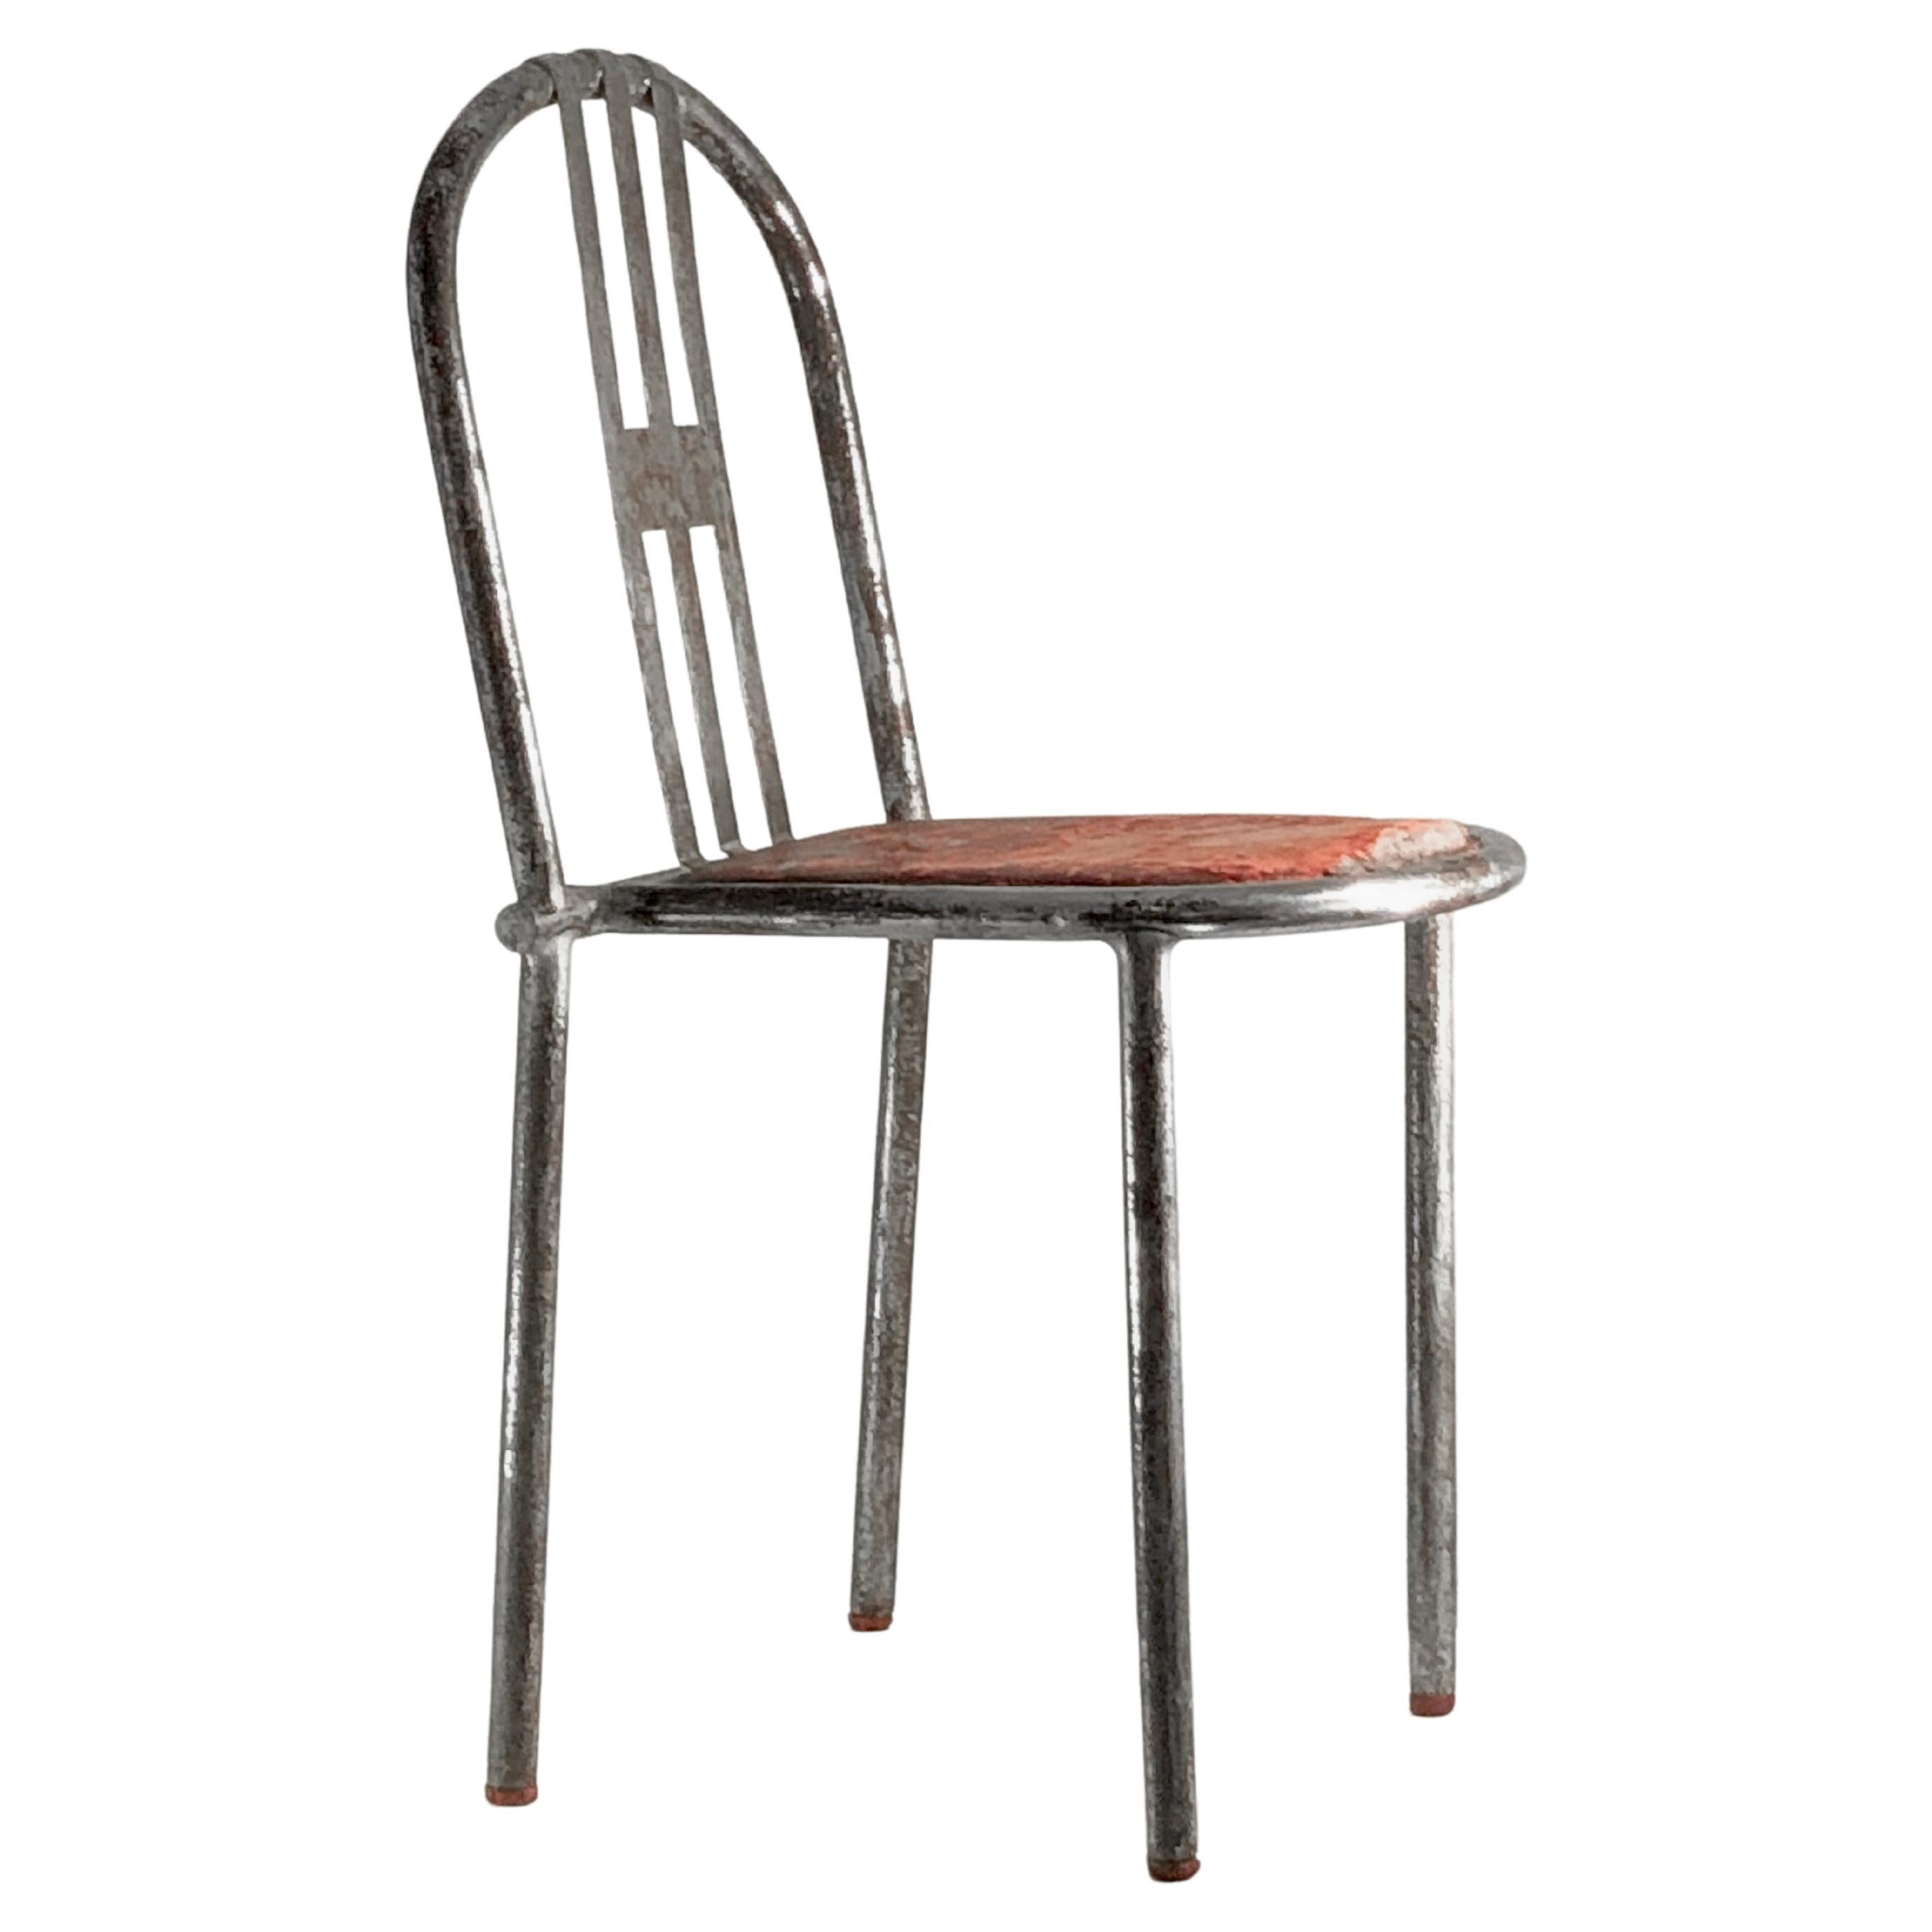 An Authentic EARLY MODERNIST Chair by ROBERT MALLET-STEVENS, TUBOR, France 1925